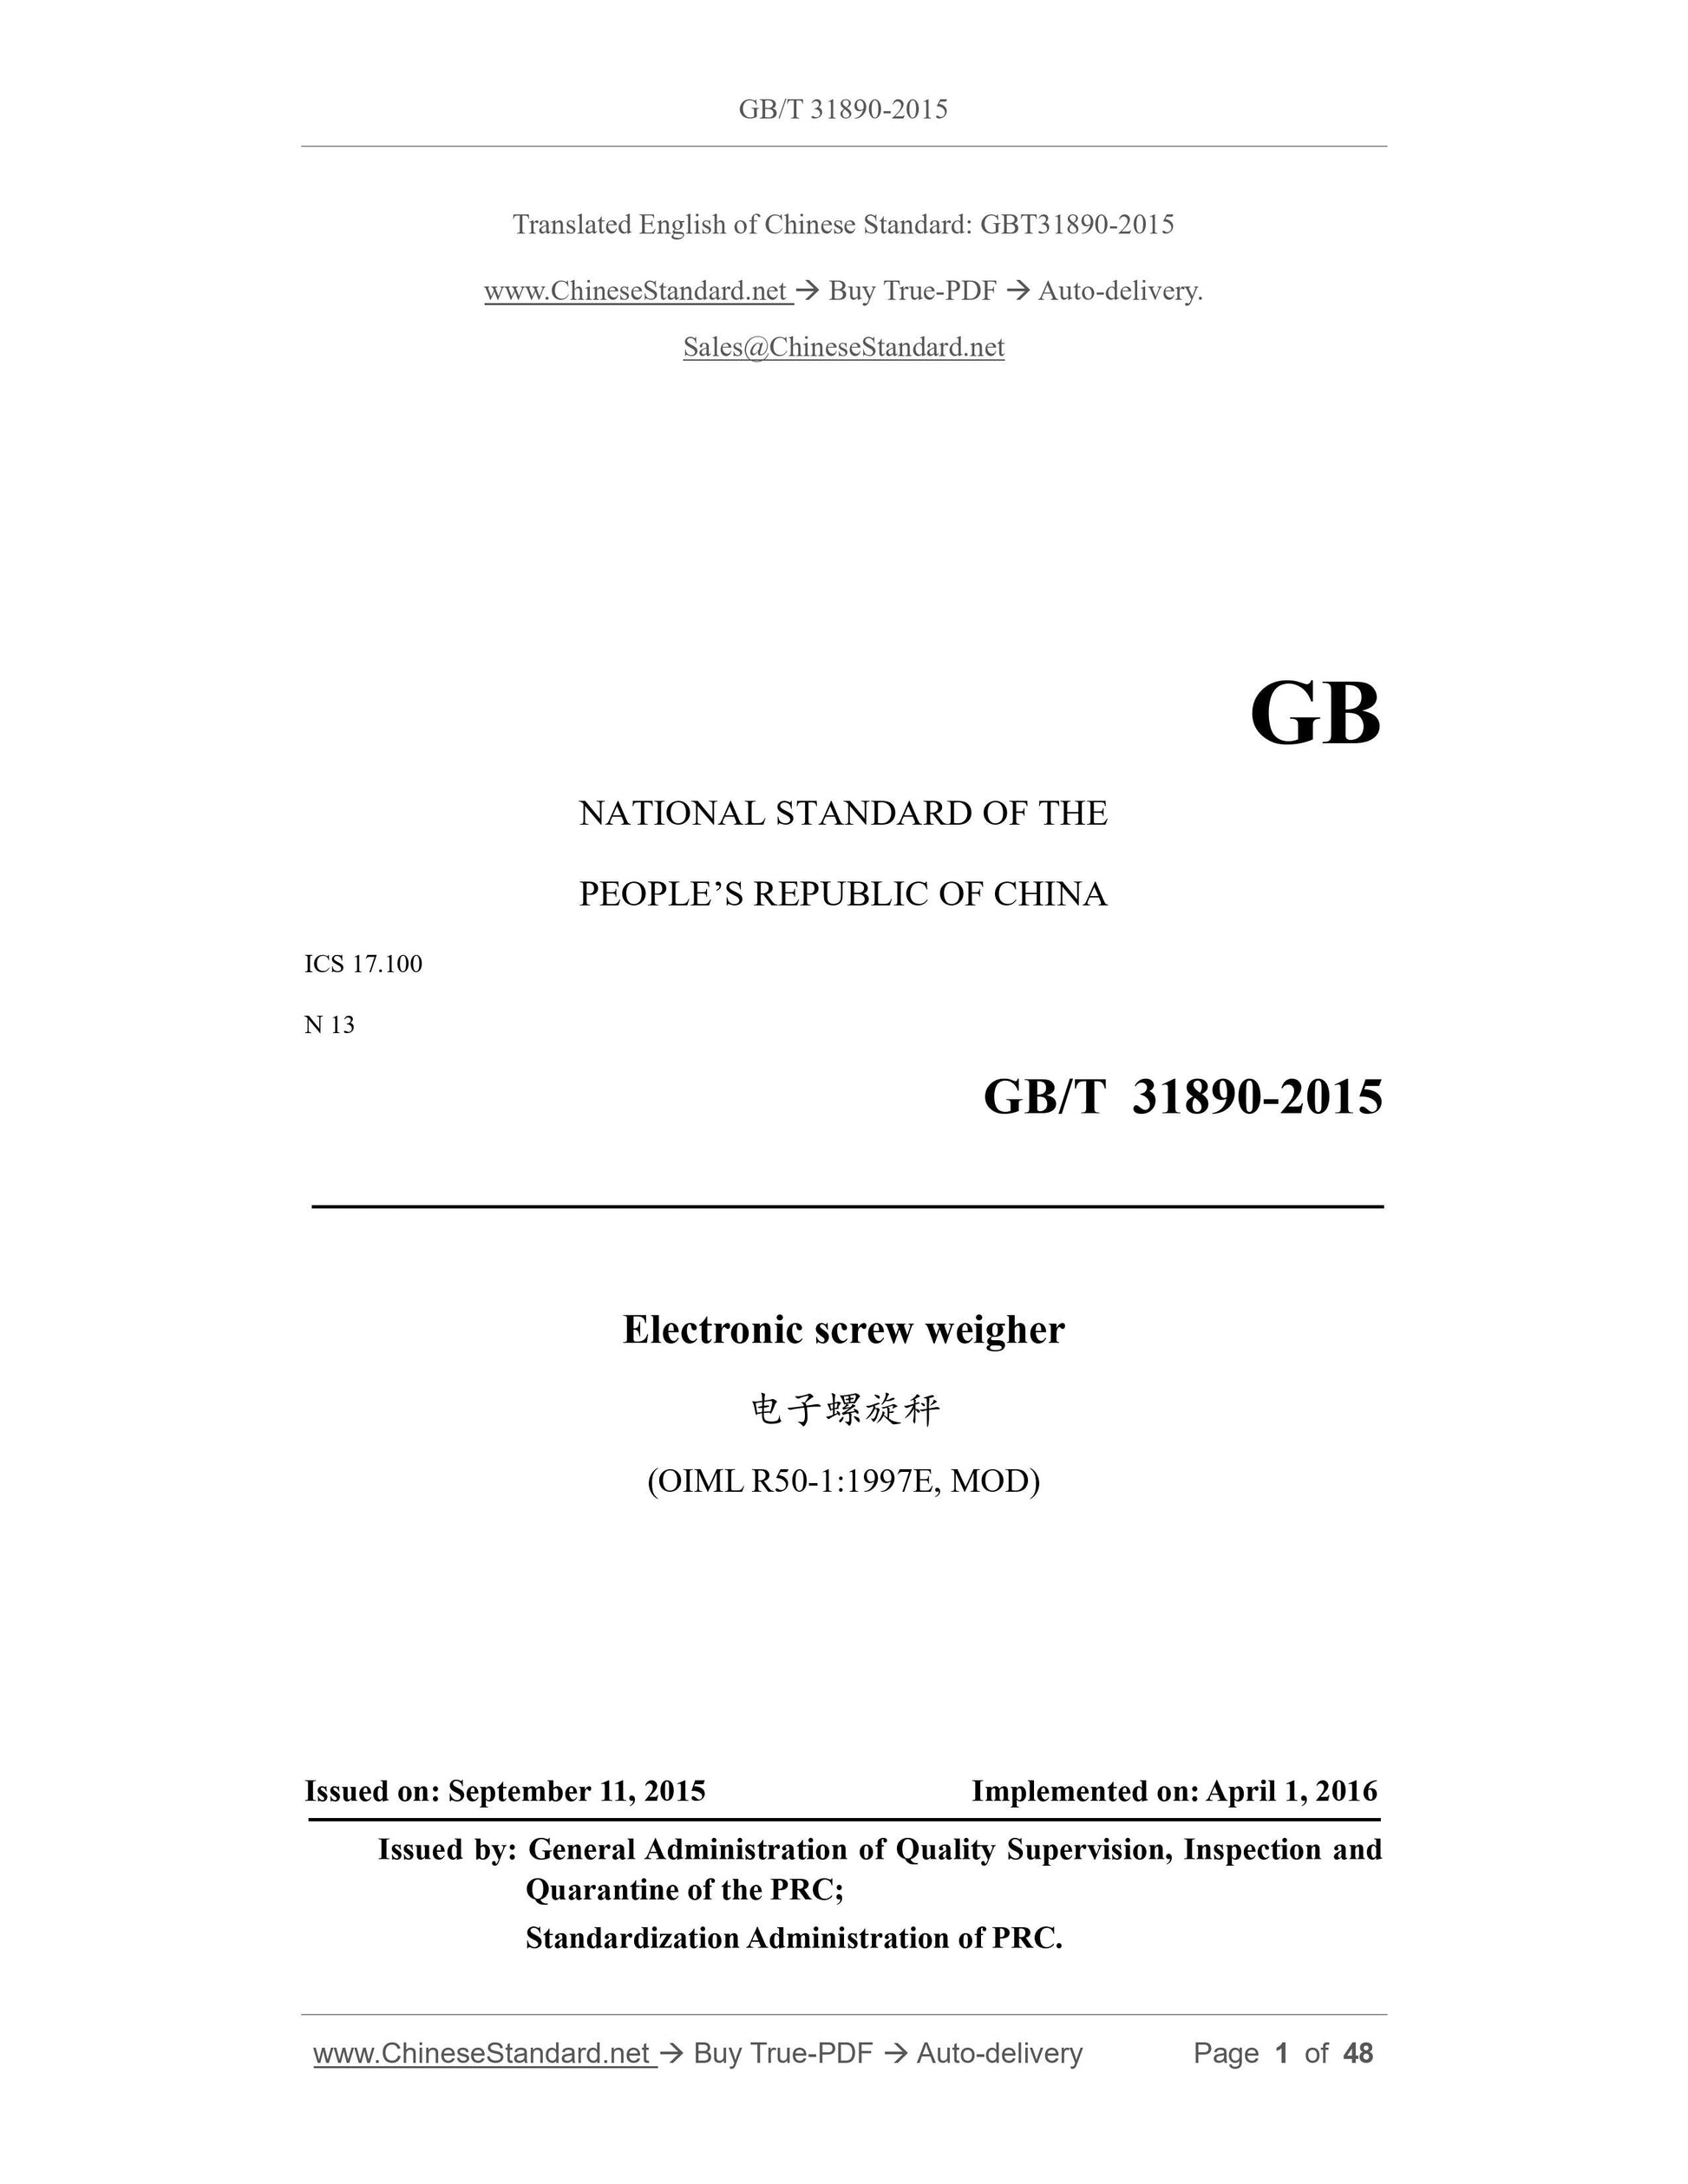 GB/T 31890-2015 Page 1